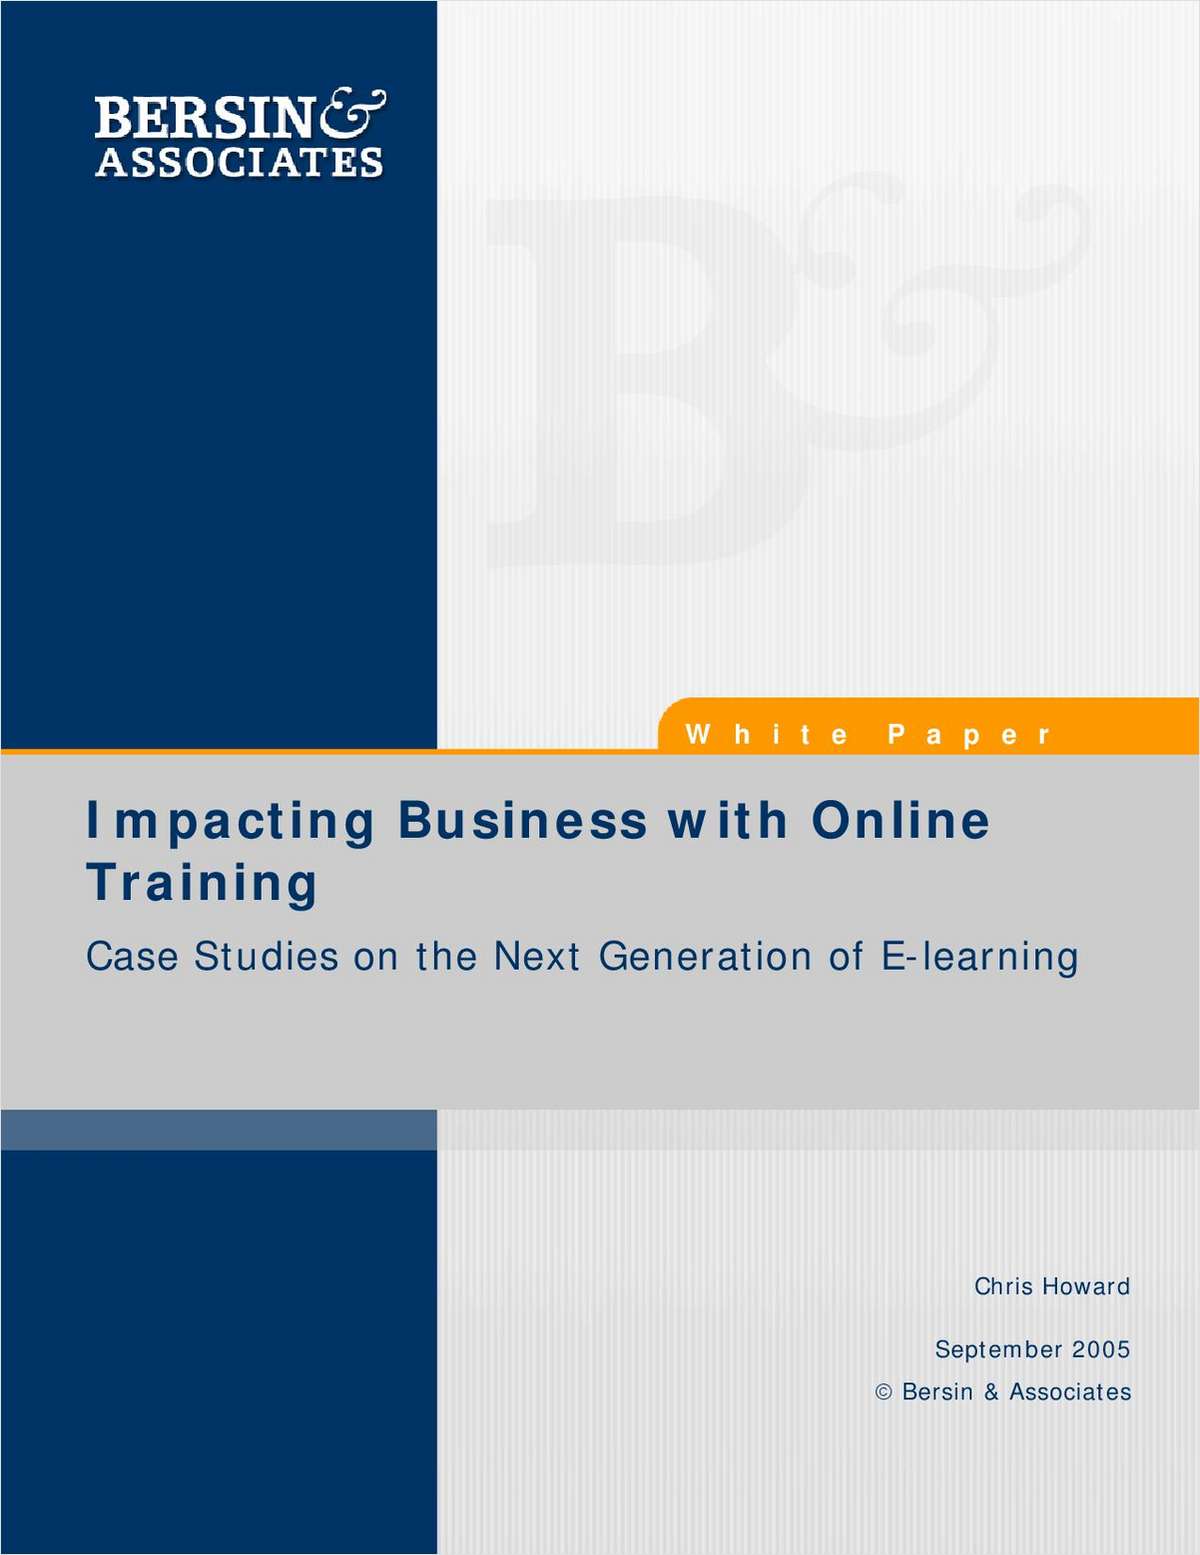 Impacting Business with Online Training